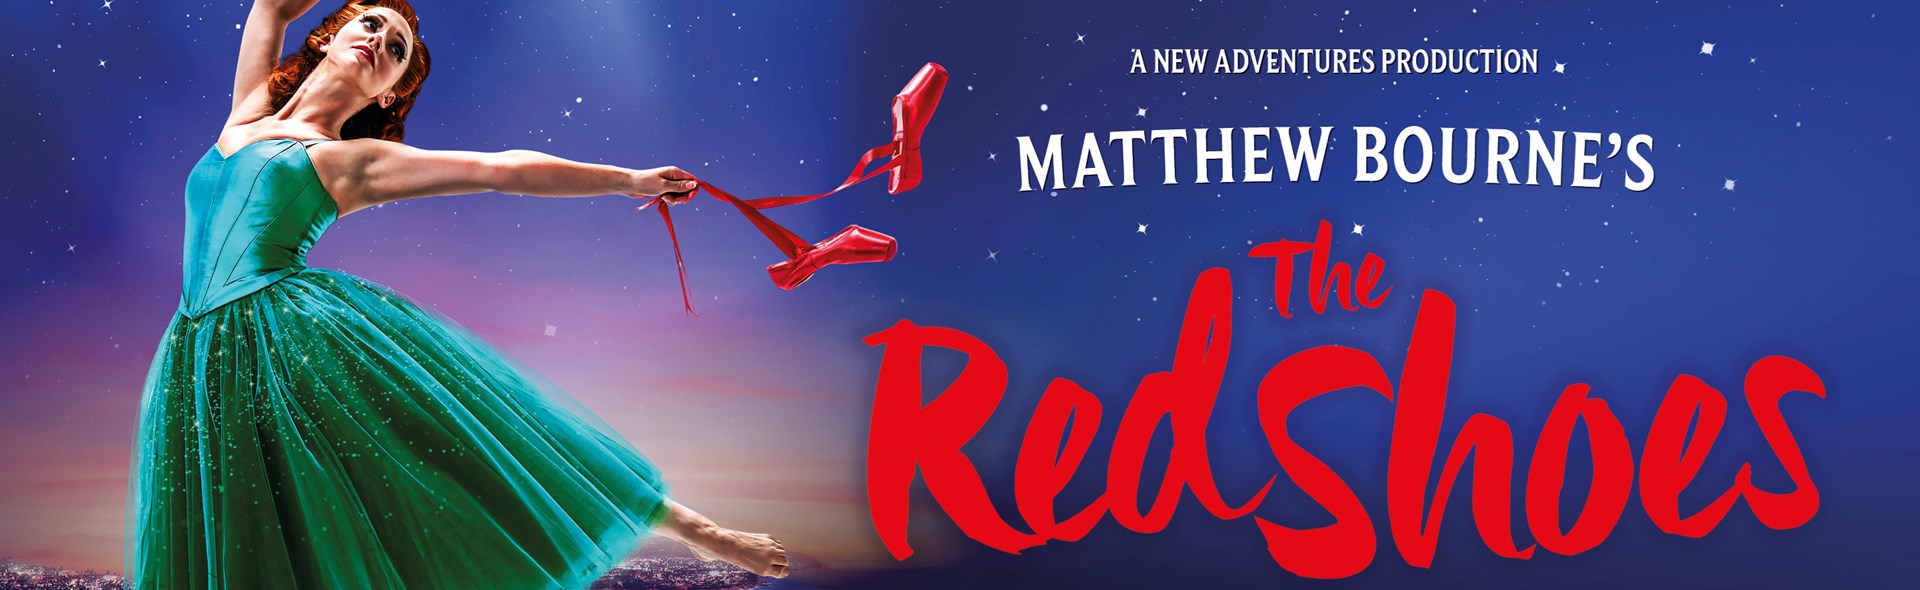 Matthew Bourne's The Red Shoes (12A TBC)